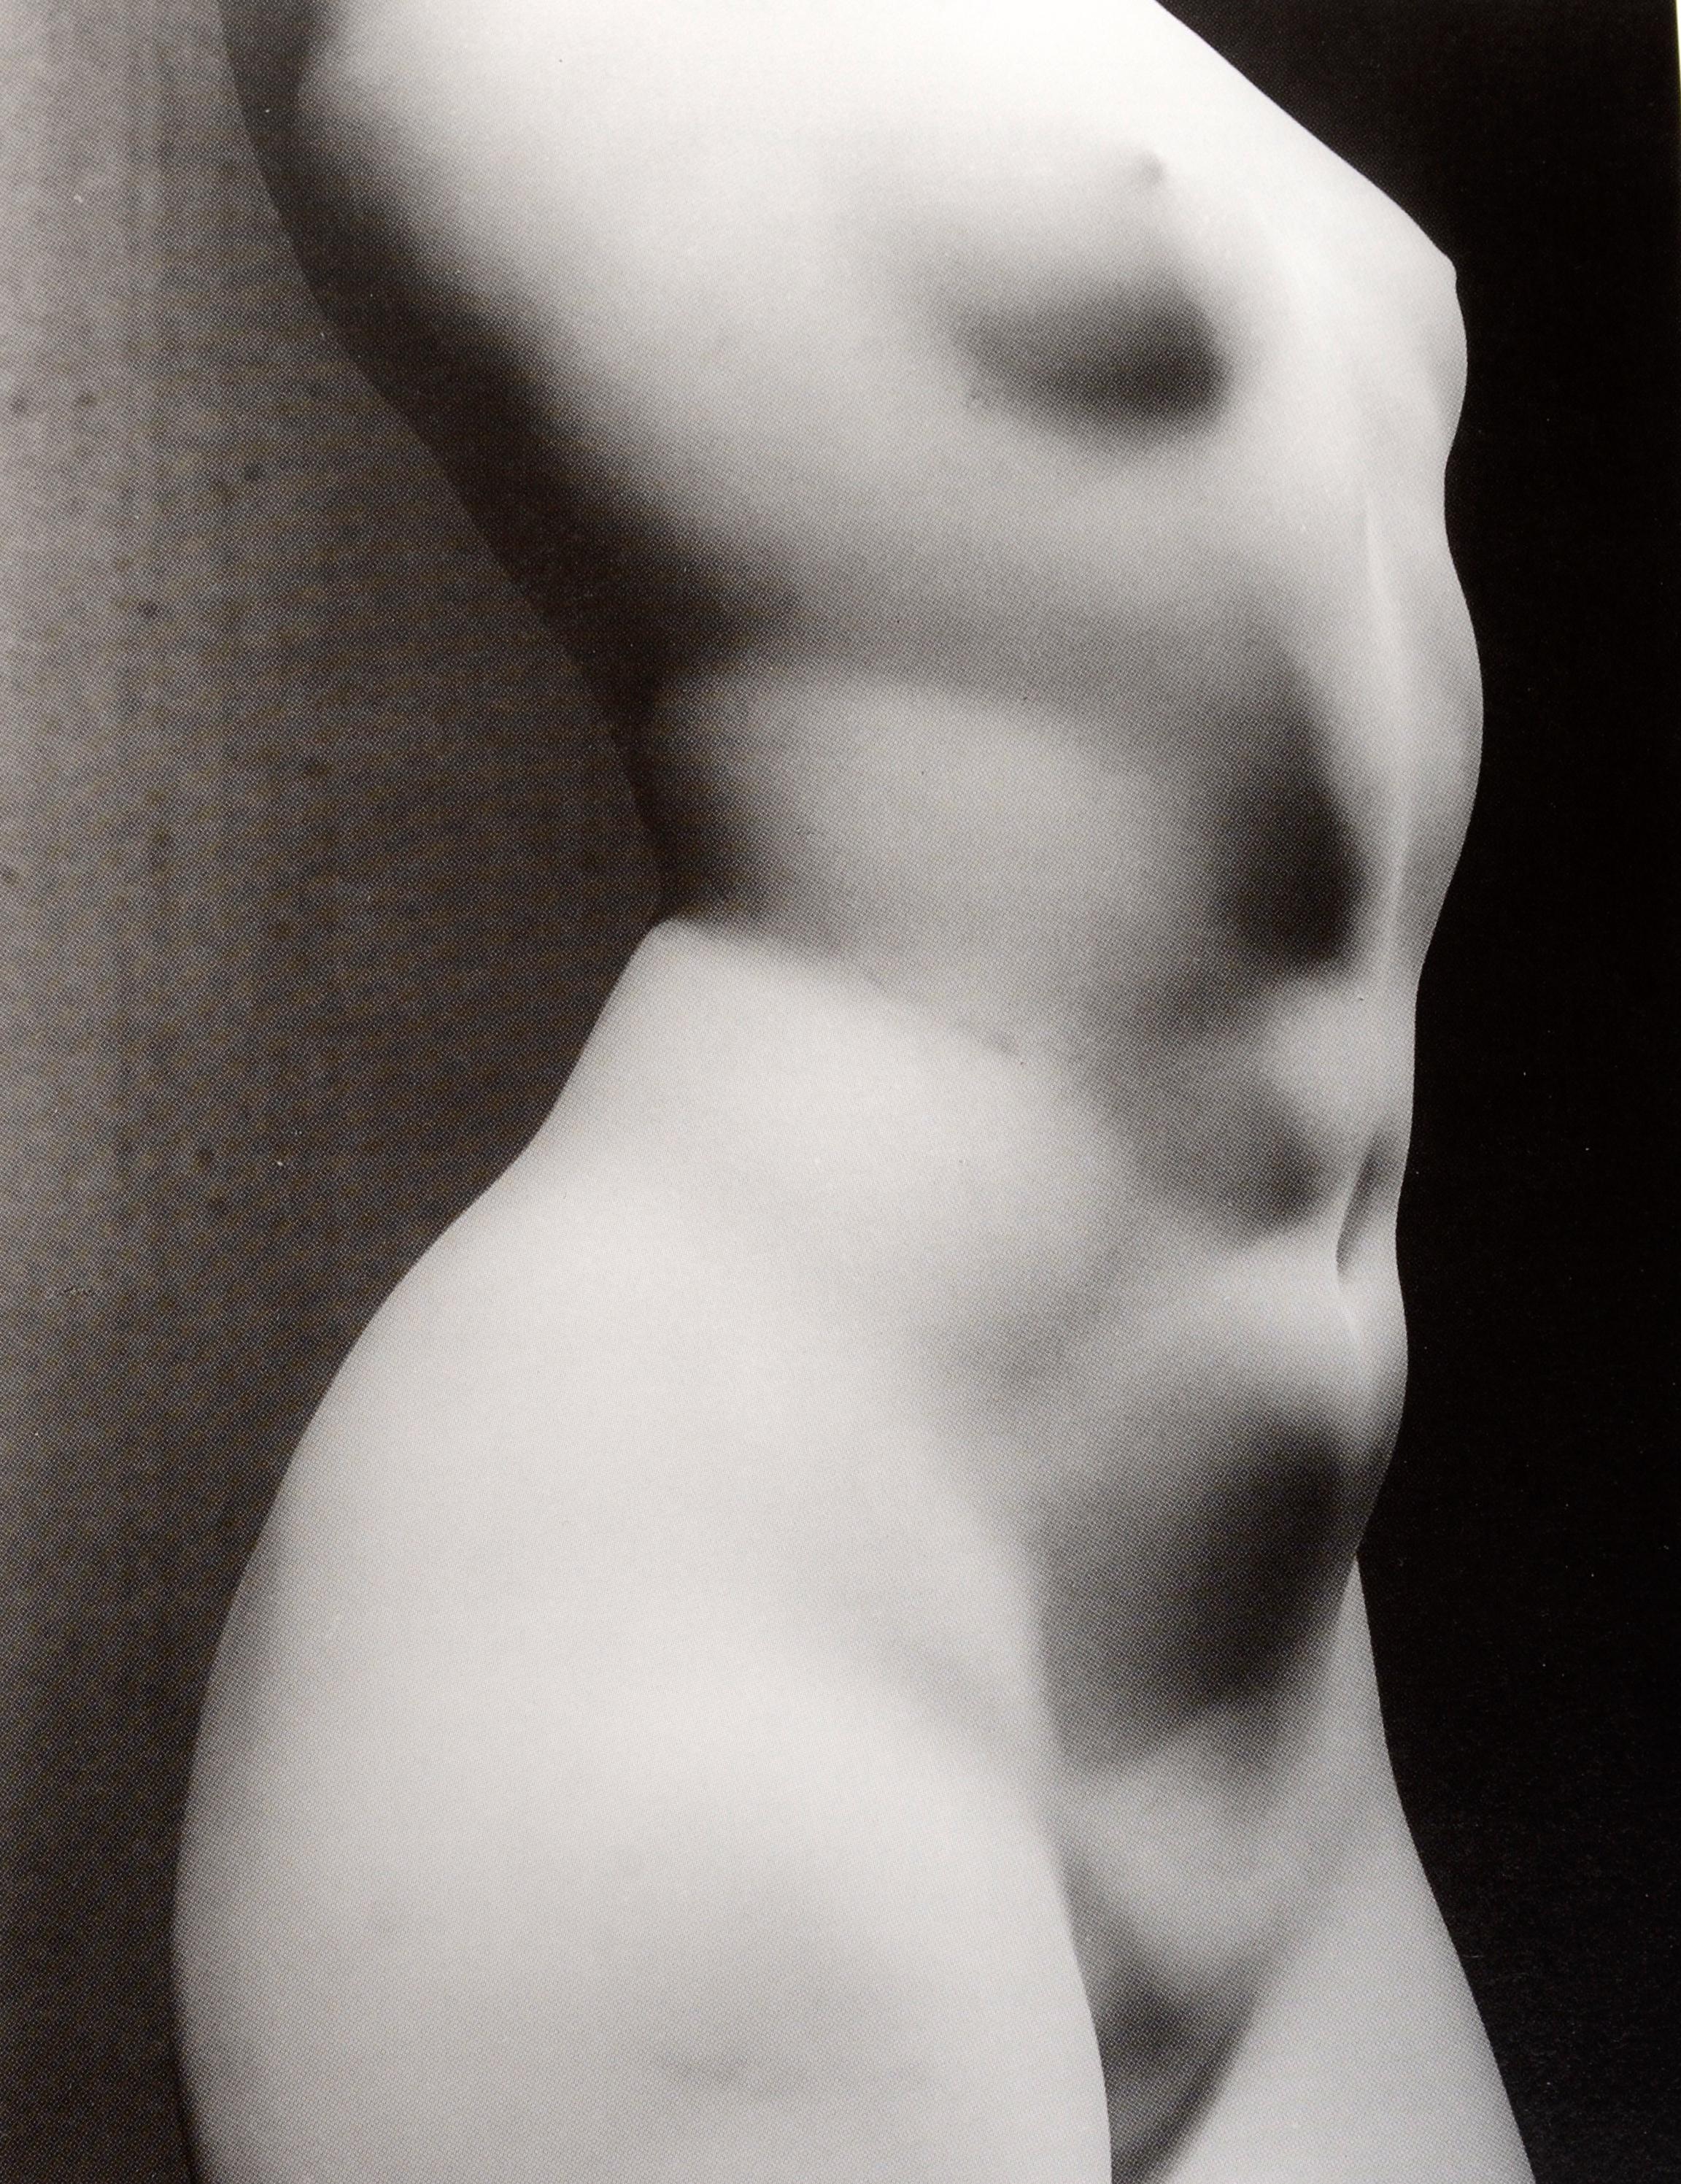 Nude Sculpture: 5,000 Years by Vicki Goldberg and Photographer-David Finn. Published by Harry N. Abrams, 2000. 1st Ed hardcover with dust jacket. A visual survey of nude sculpture throughout the ages, containing 200 specially taken photographs. The